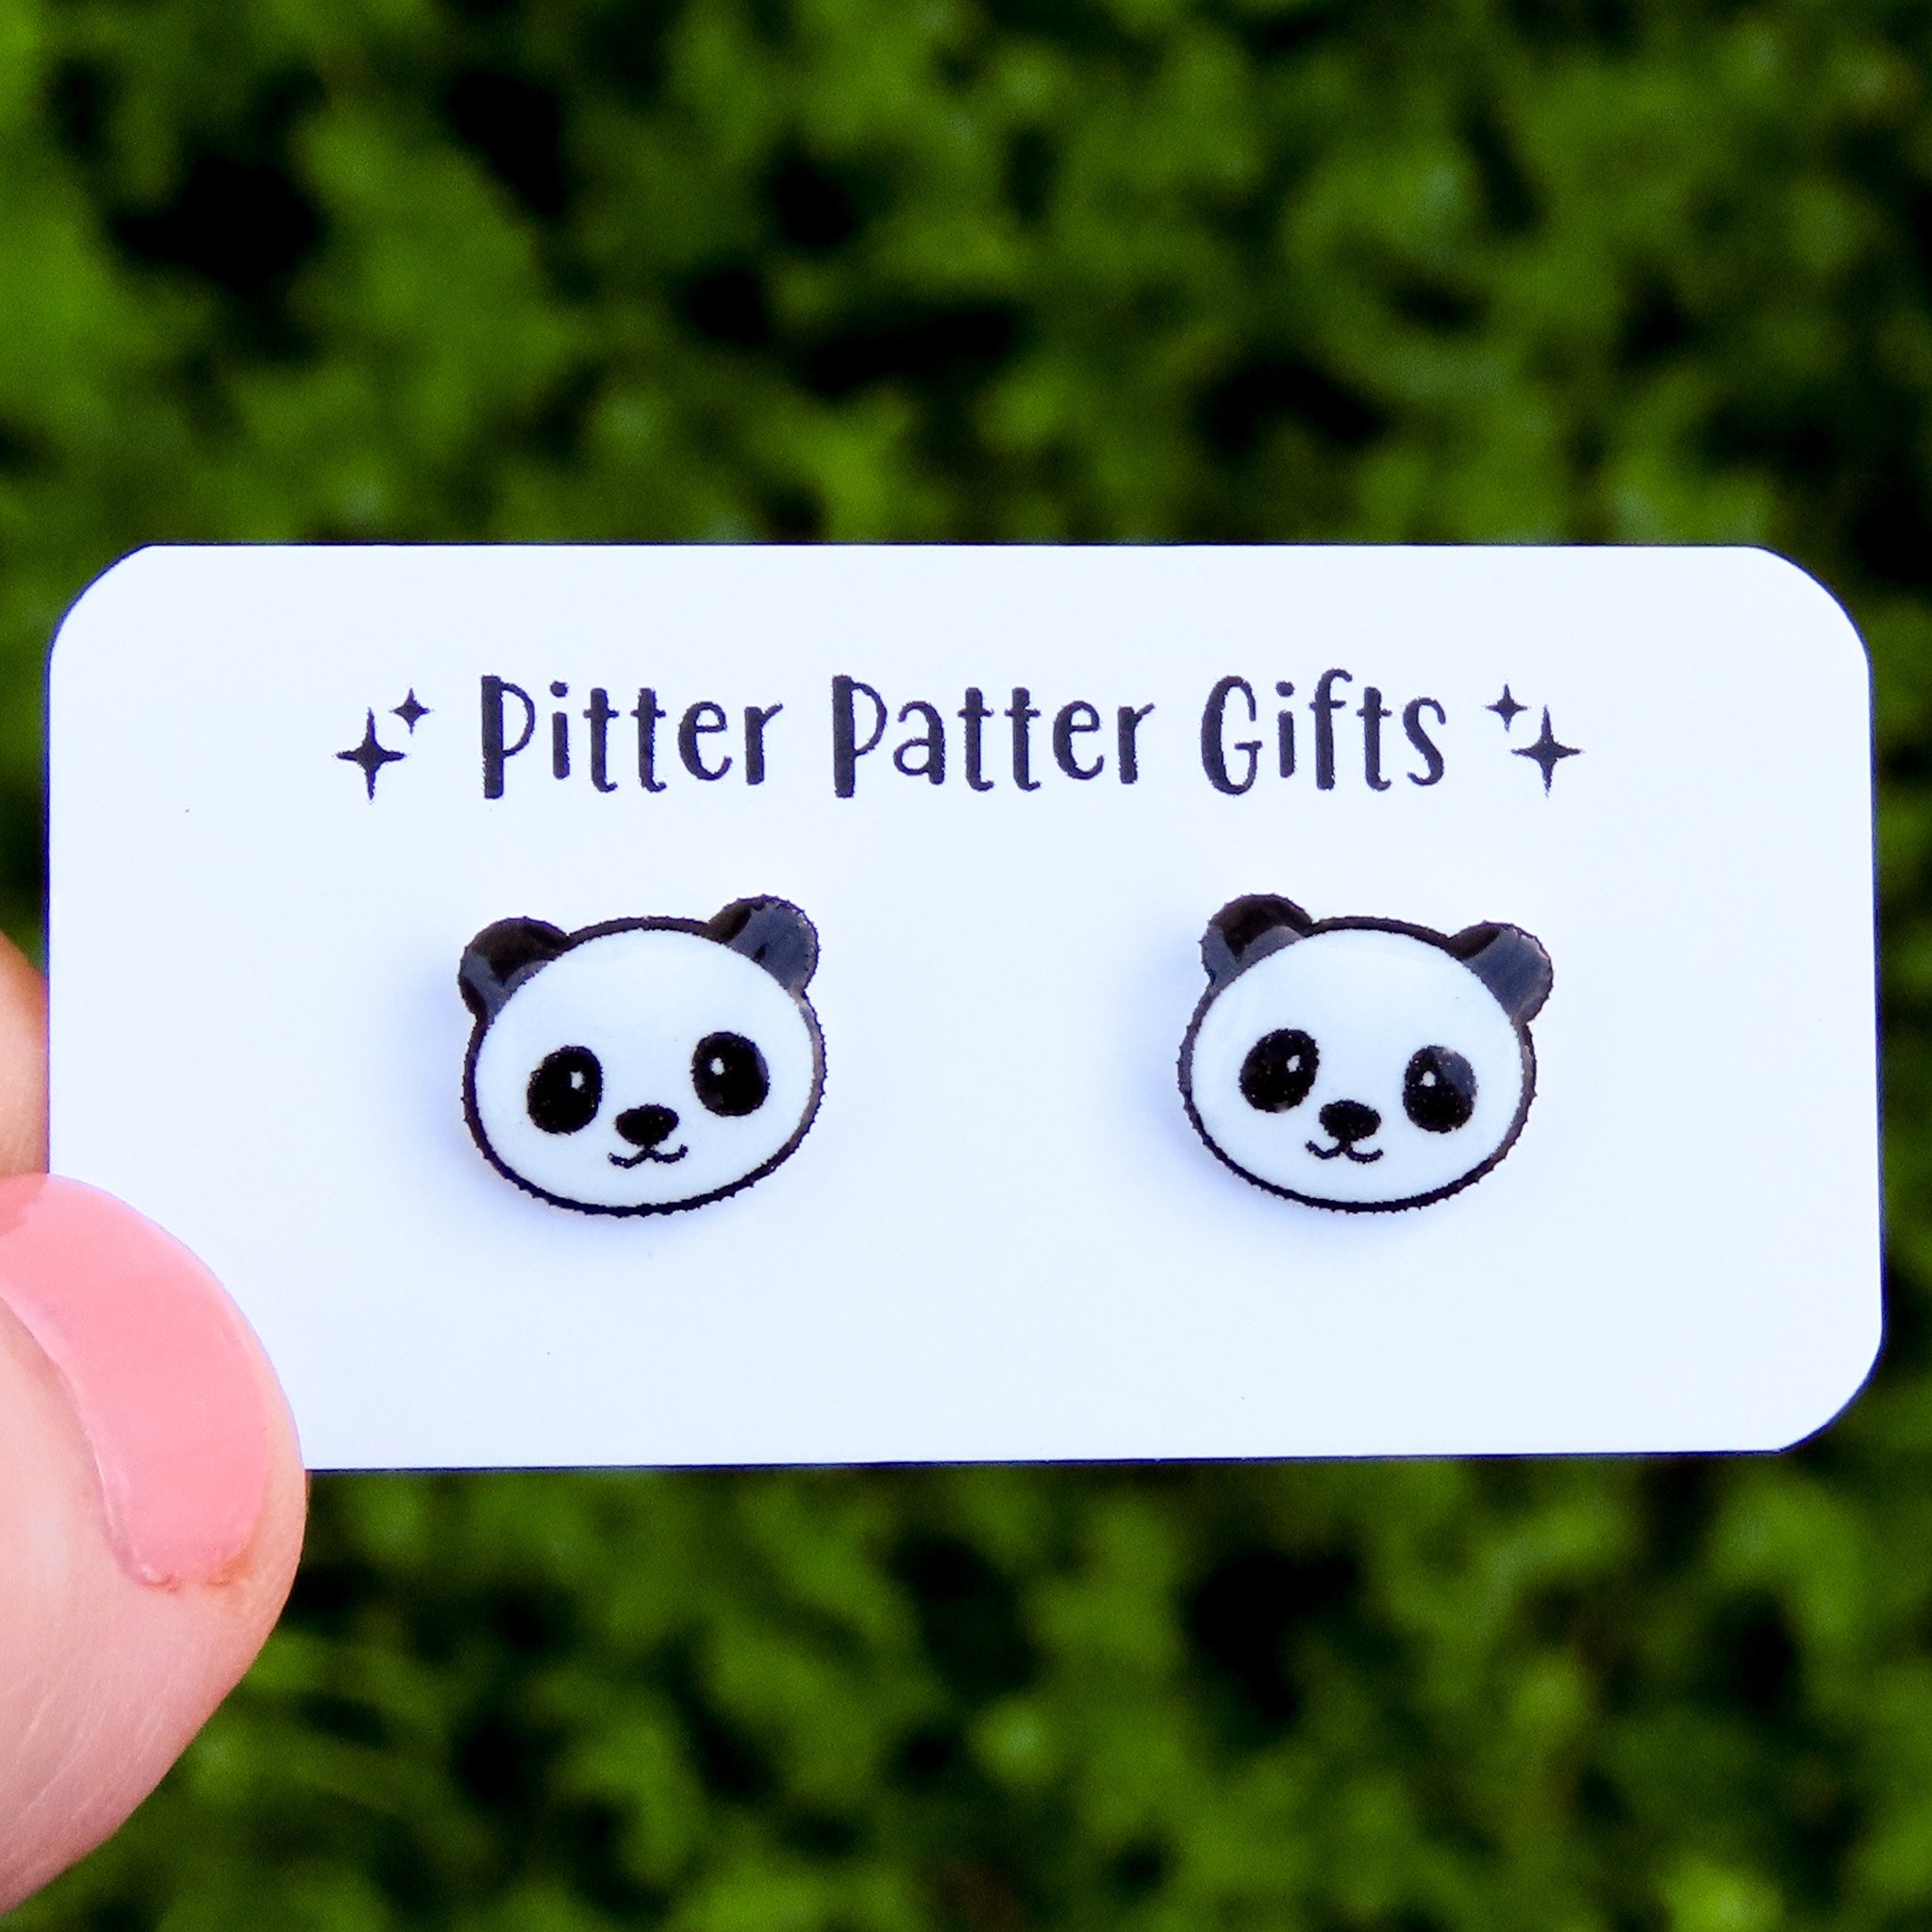 Panda Wooden Stamps, Panda's Daily Life Rubber Stamps, Original Design Stamps  for Journaling, Paper Craft 